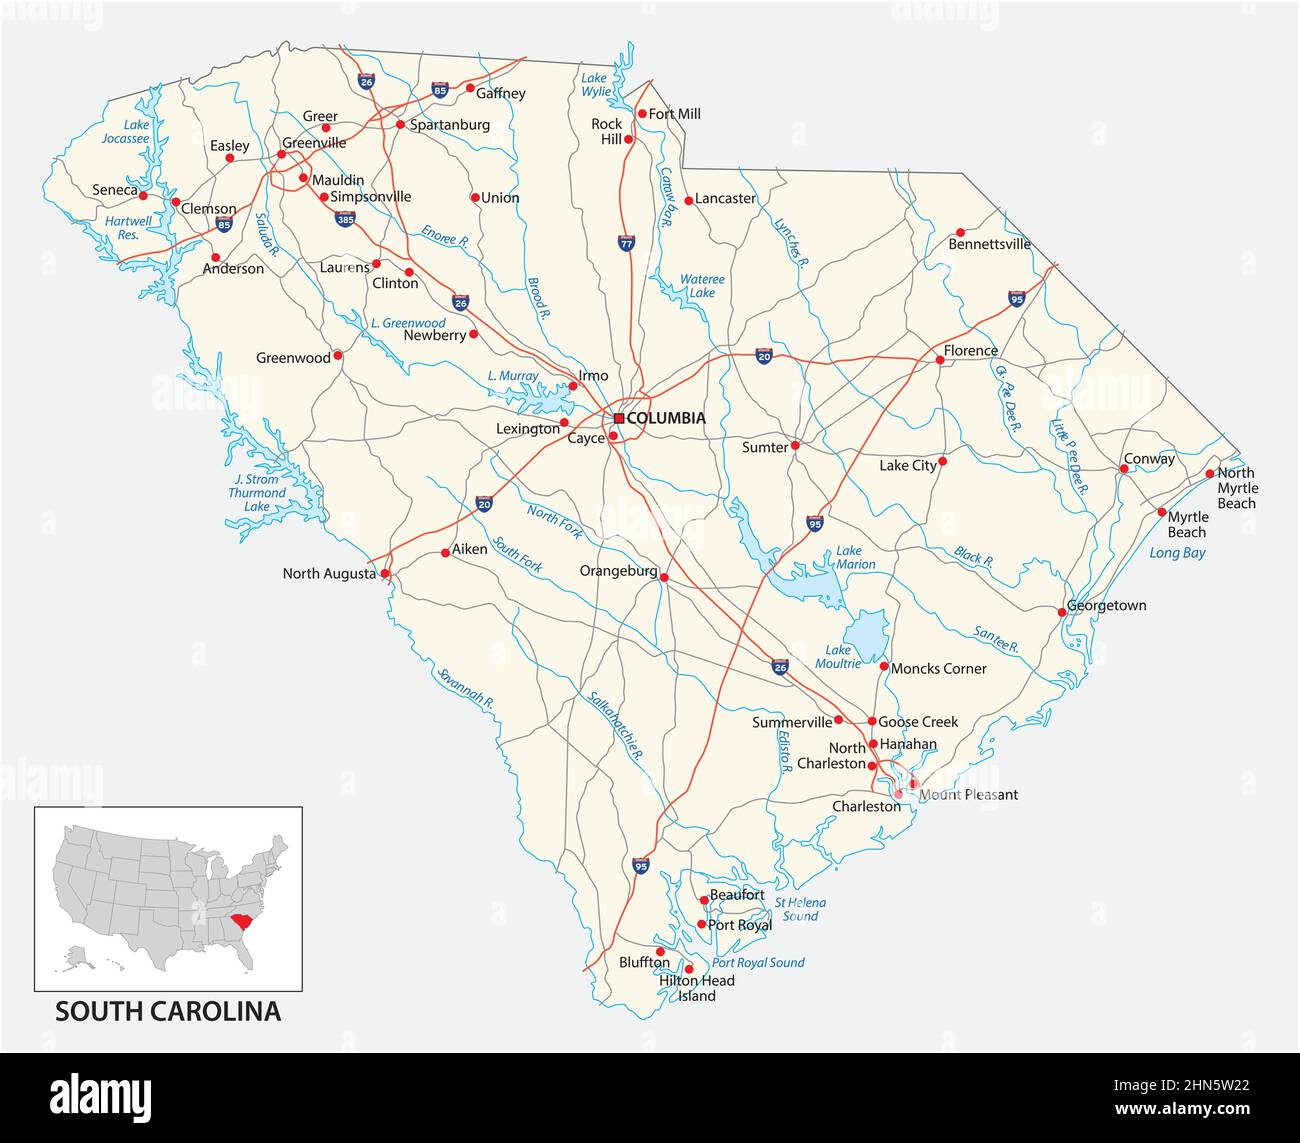 Deep South States Road Map